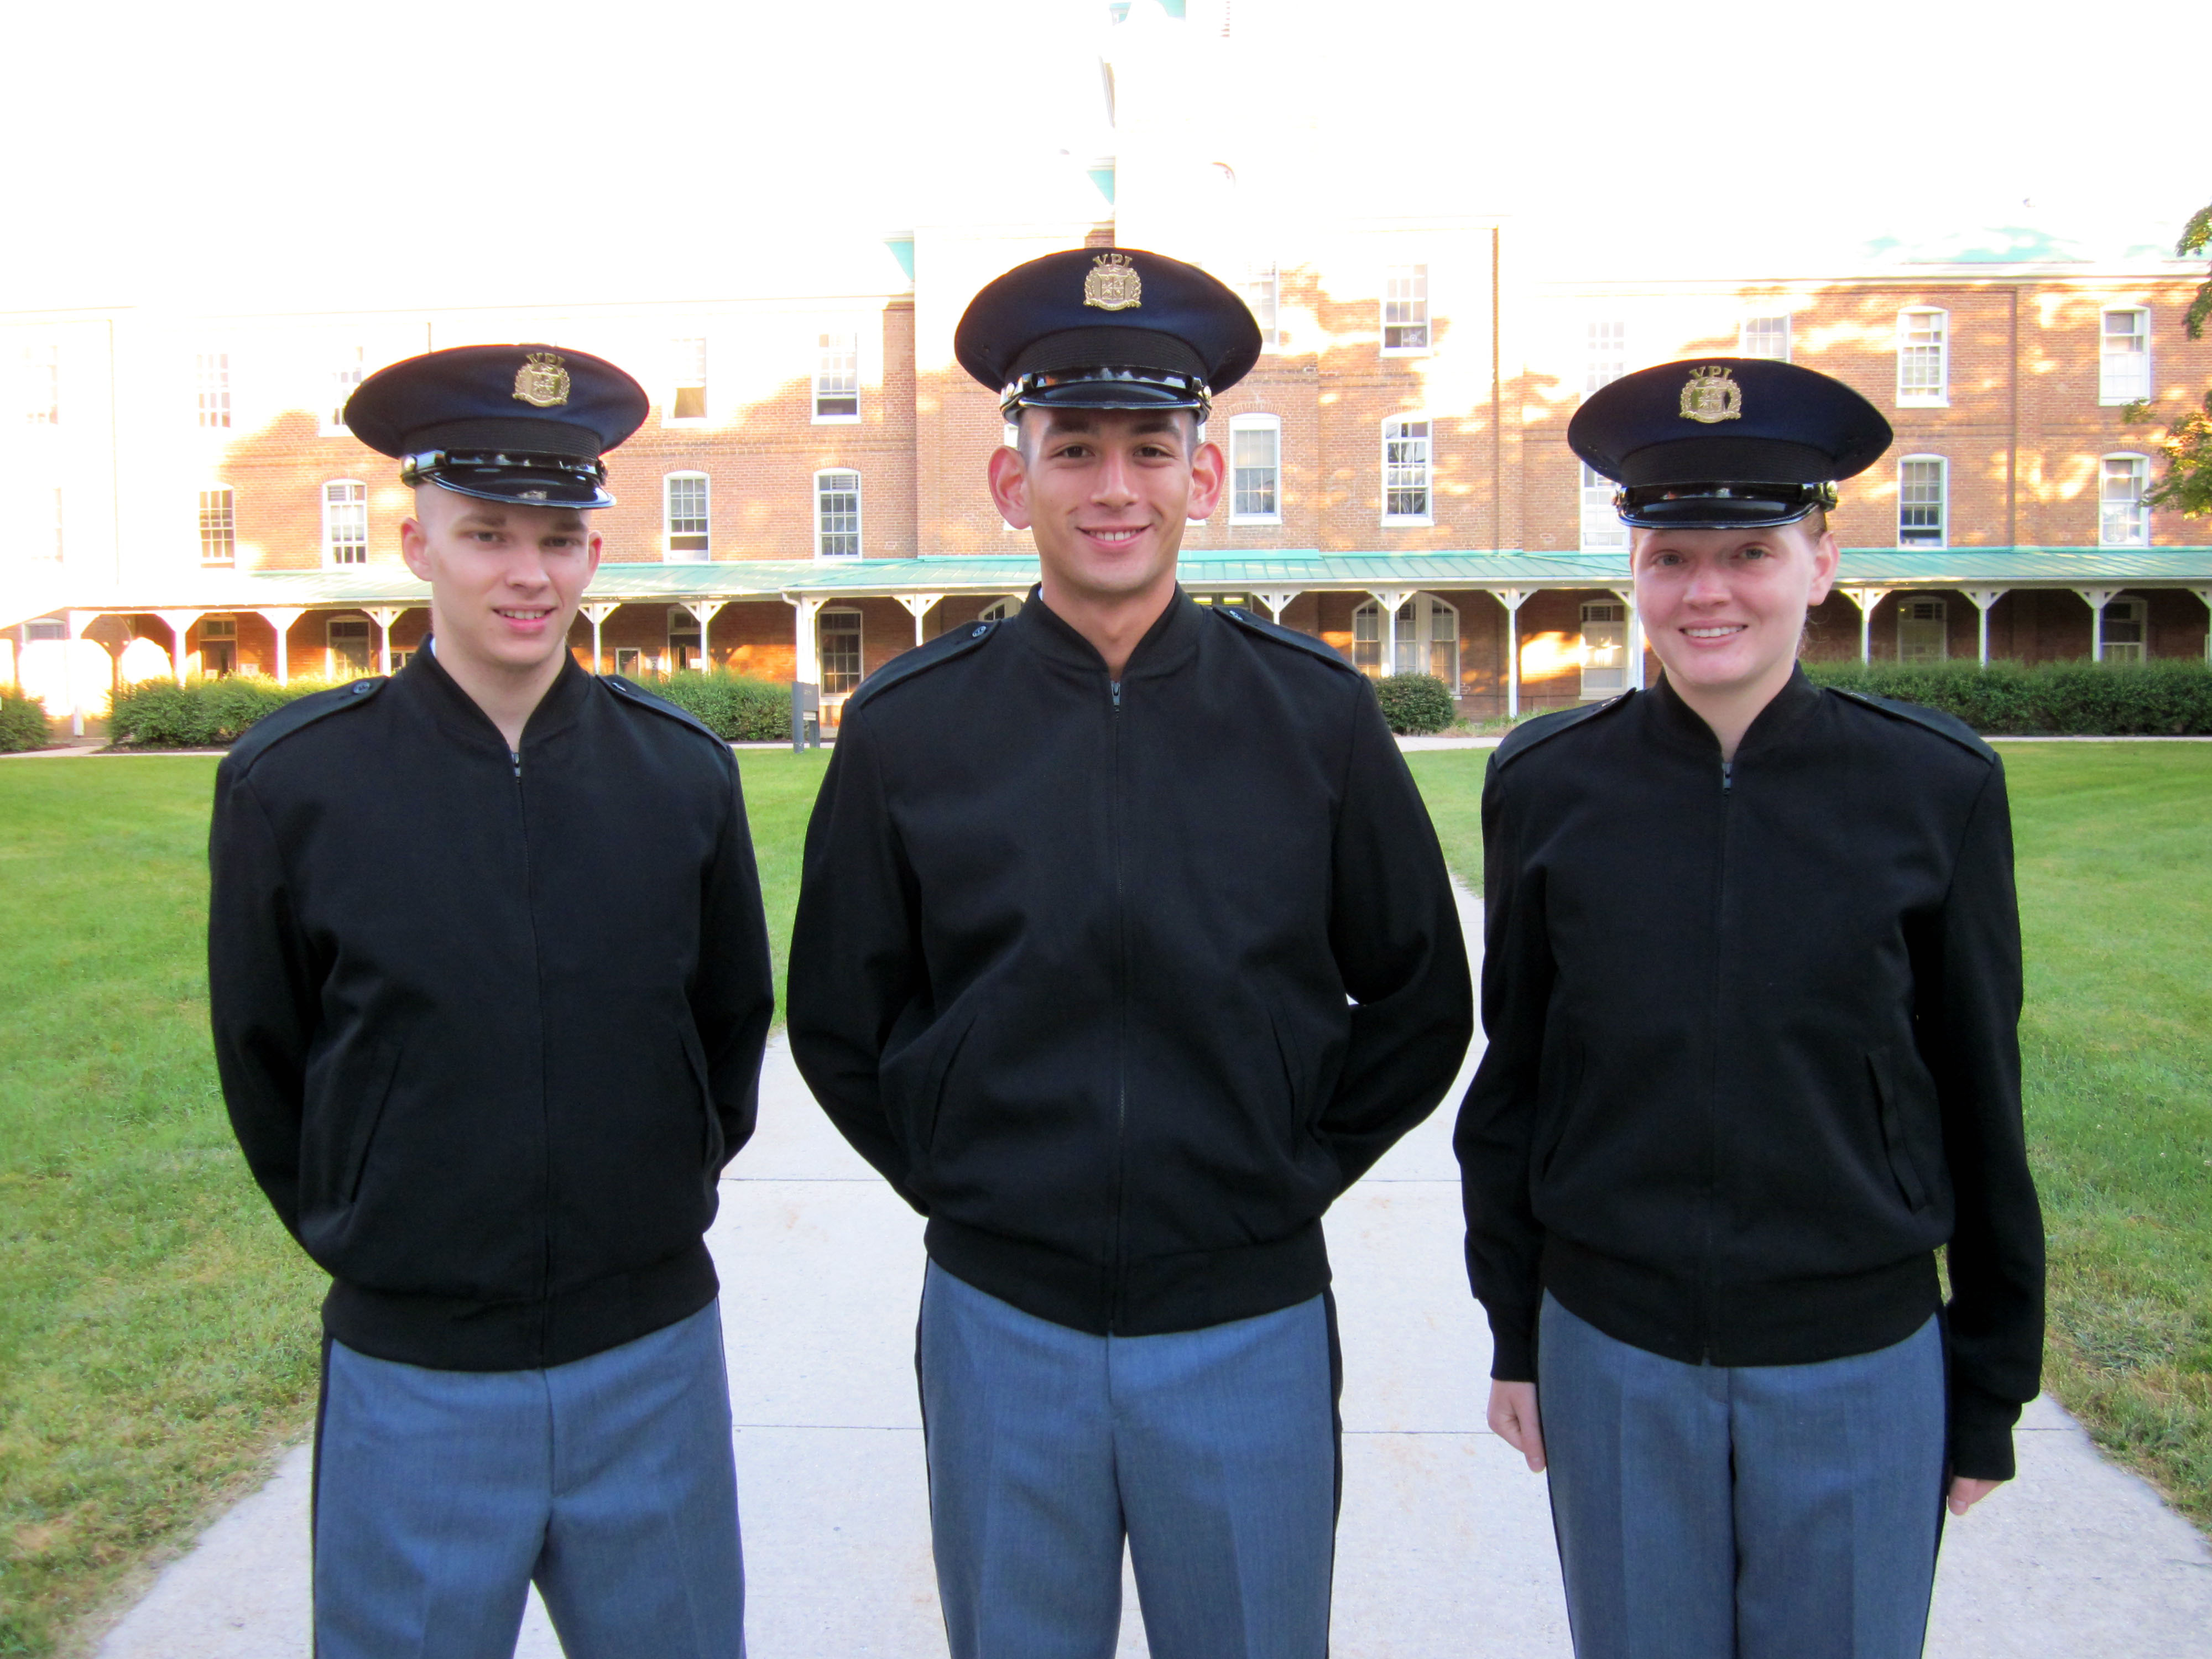 From left to right are Cadets Matthew Hitchcock, Scott Phelps, and Megan Burton 